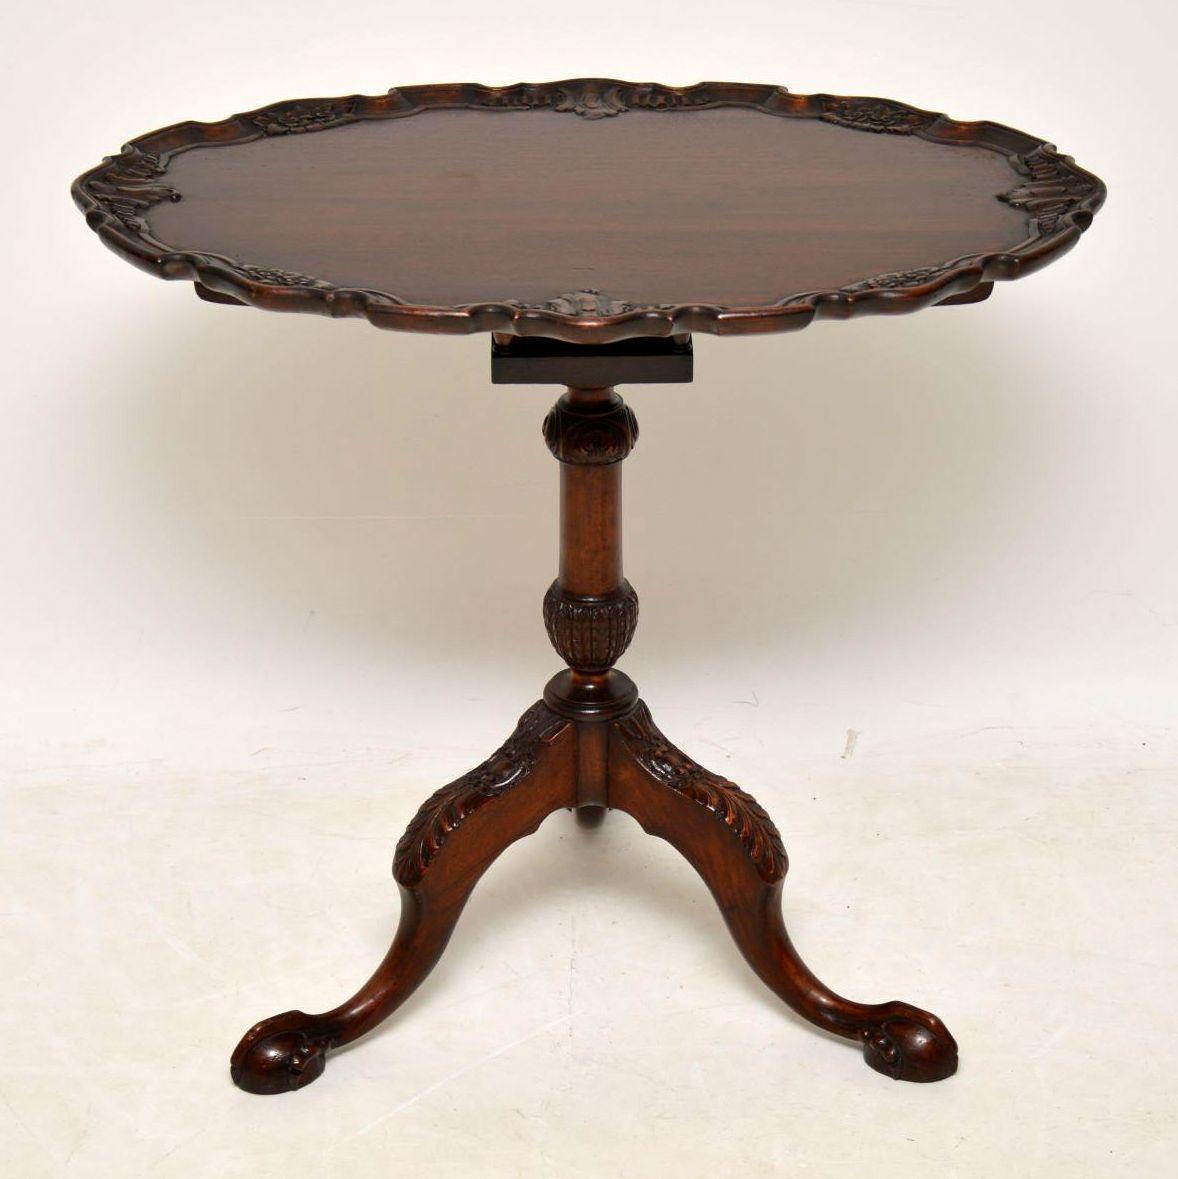 Antique Chippendale style solid mahogany flip top occasional table in good condition and dating from circa 1930s-1950s period. At first sight it actually looks Georgian period, because of the quality of the carvings. This table has an oval top with